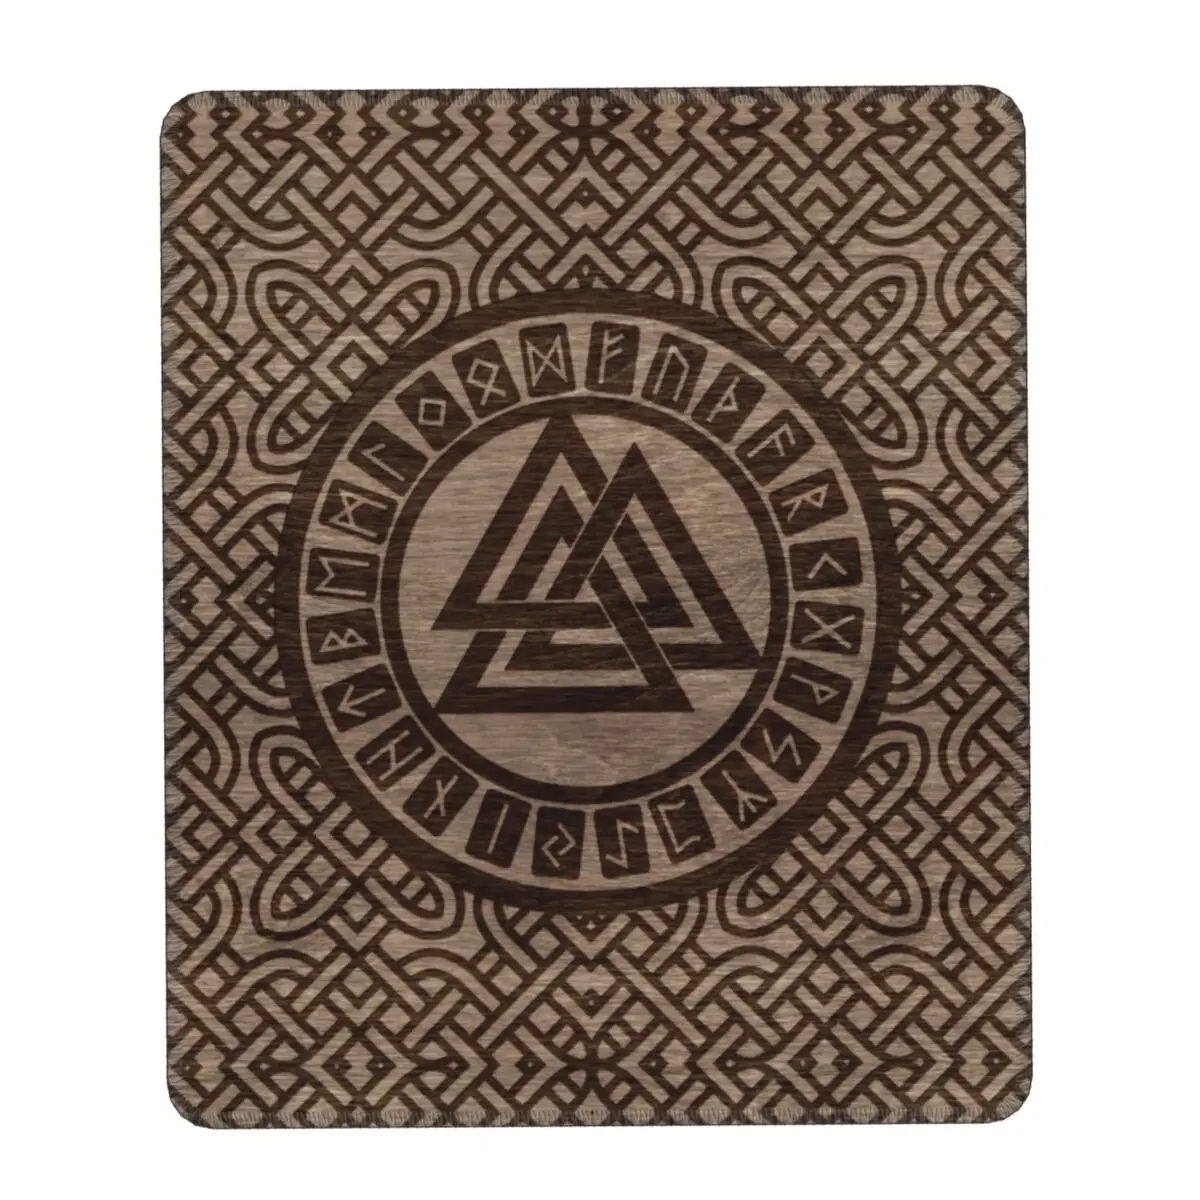 

Valknut Symbol And Runes On Wood Computer Mouse Pad Mousepad with Stitched Edges Rubber Norse Viking Odin Mouse Mat for Gaming